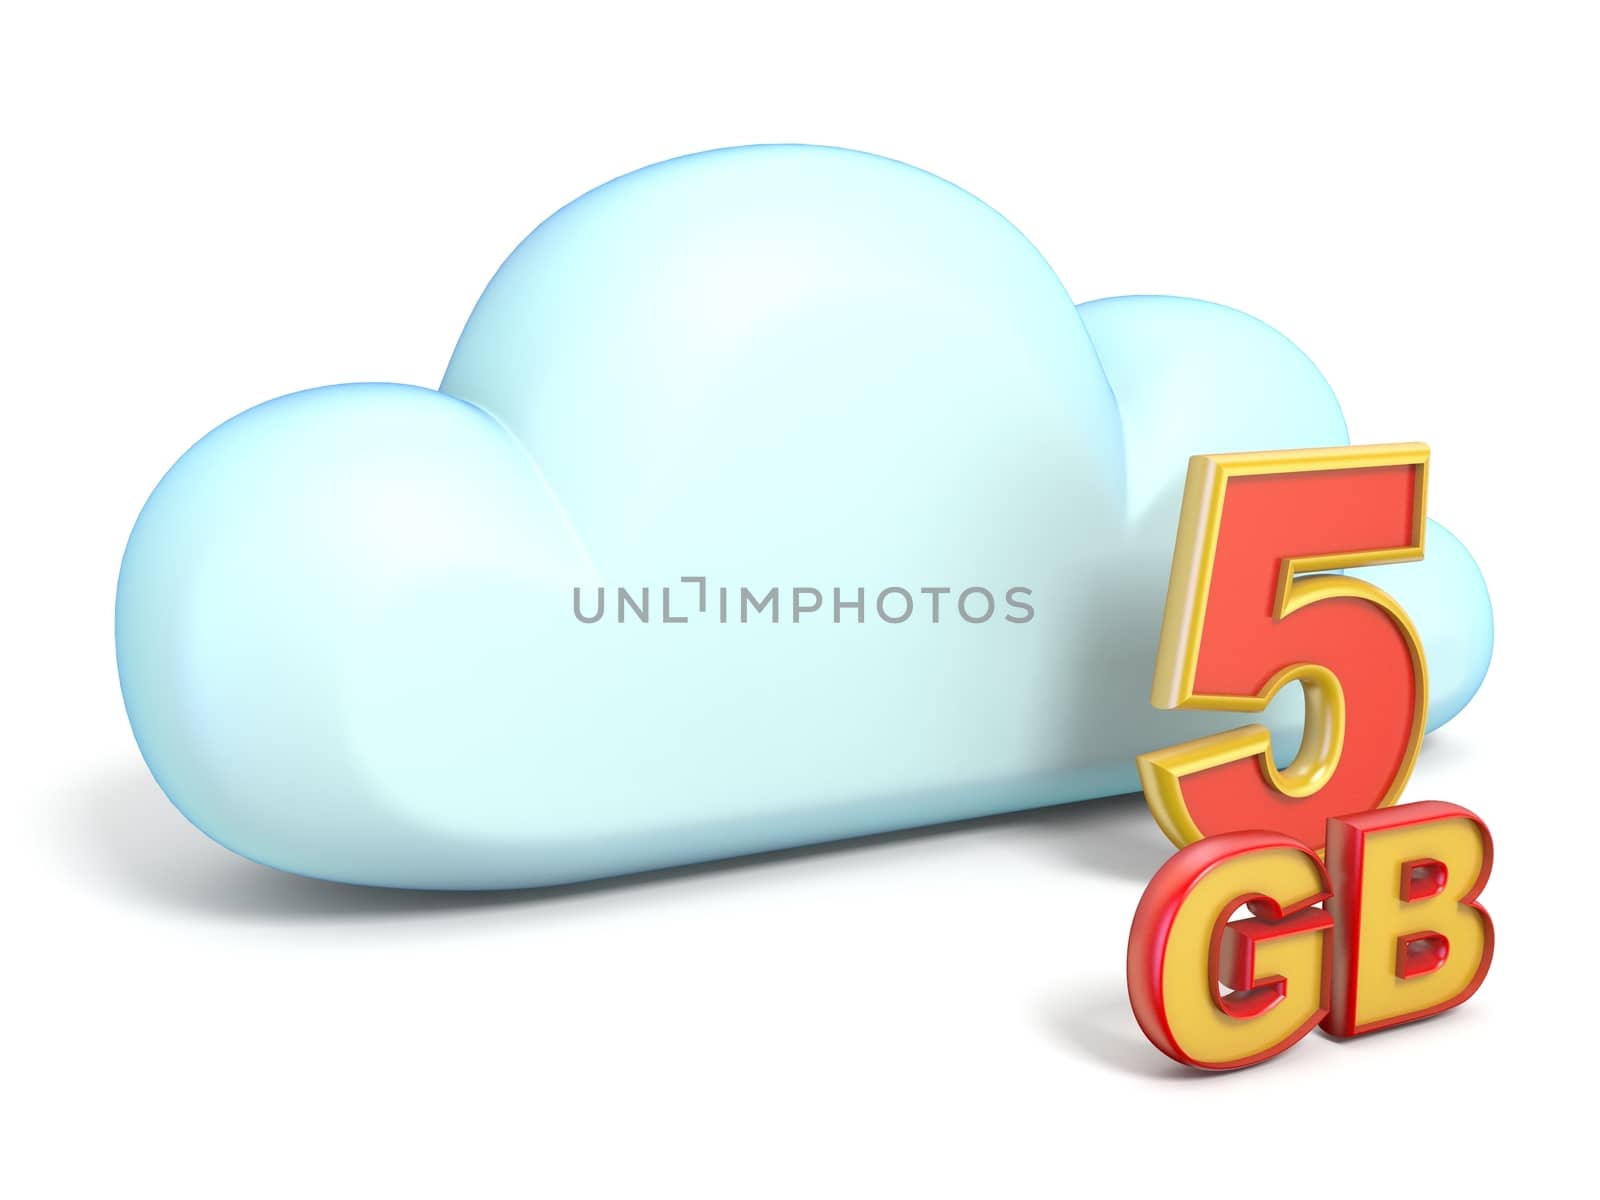 Cloud icon 5 GB storage capacity 3D rendering isolated on white background